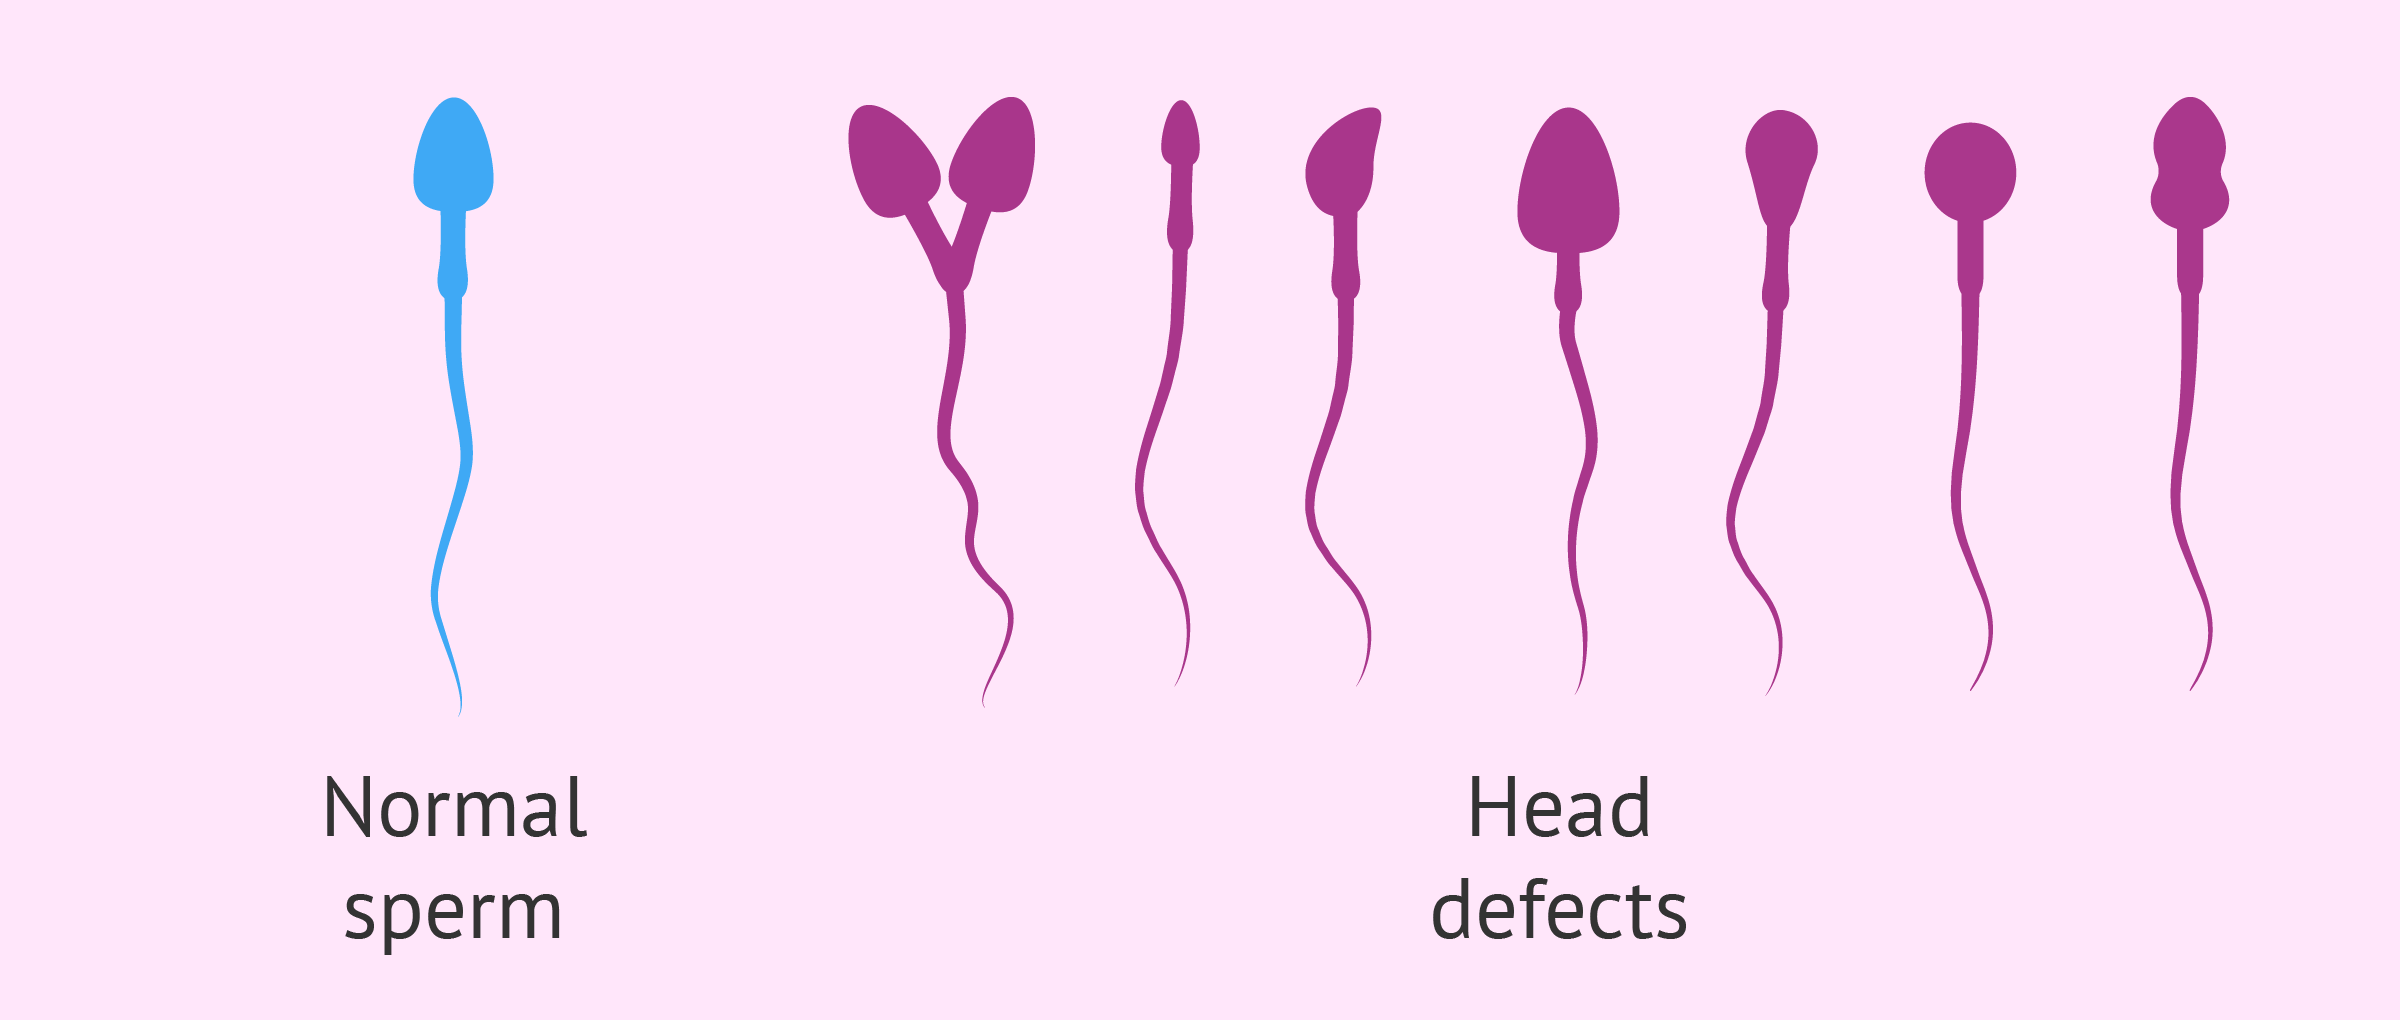 Head defects in sperm